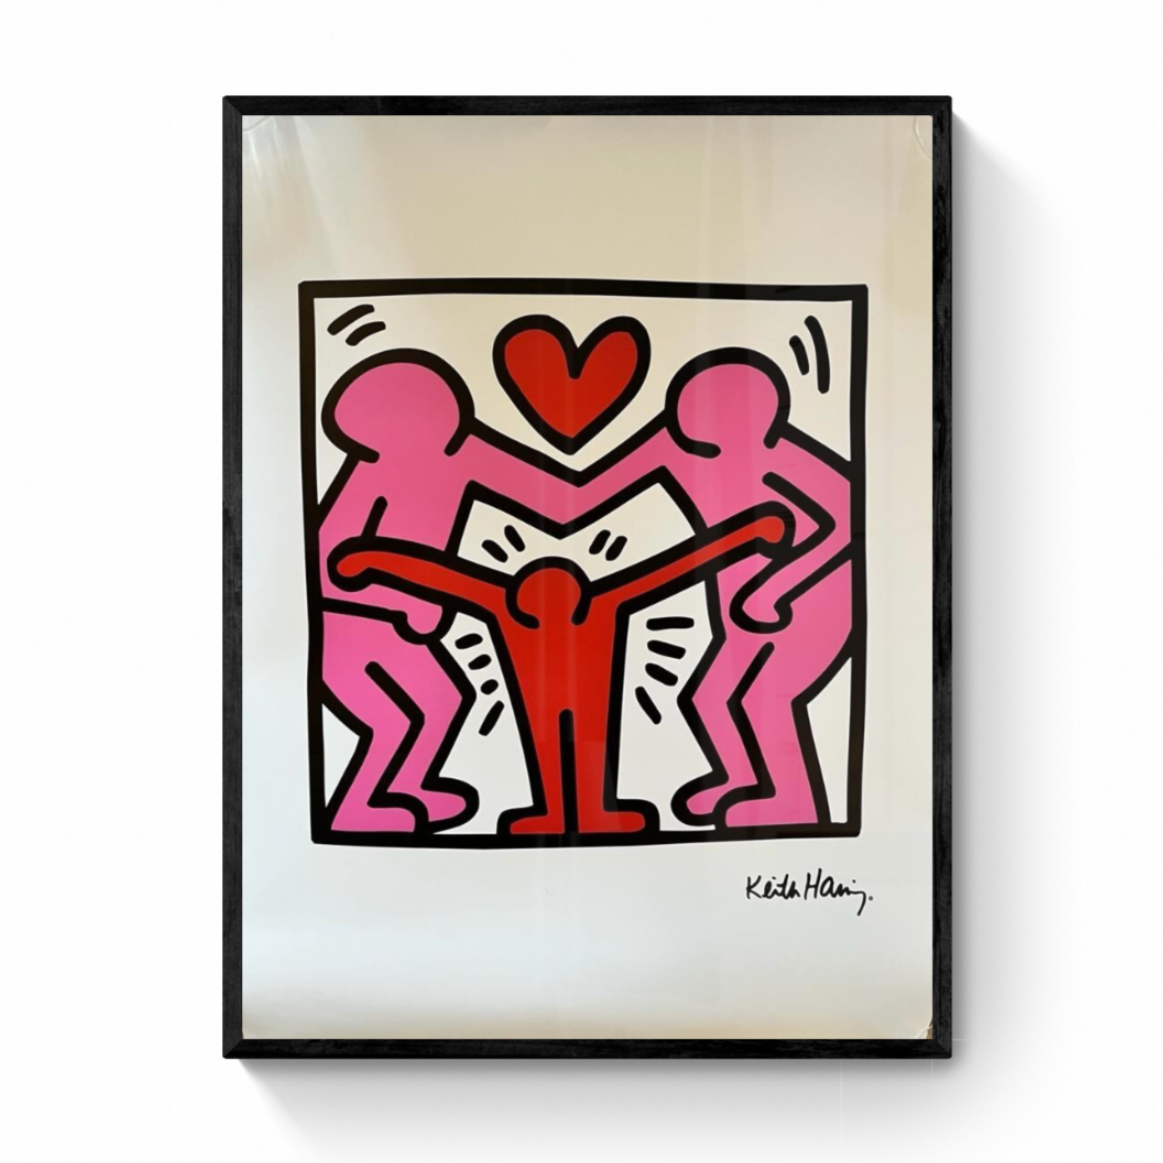 Official Poster - Keith Haring, Untitled (Family) - MocoMuseum (Edition strictement limitée) - 2019